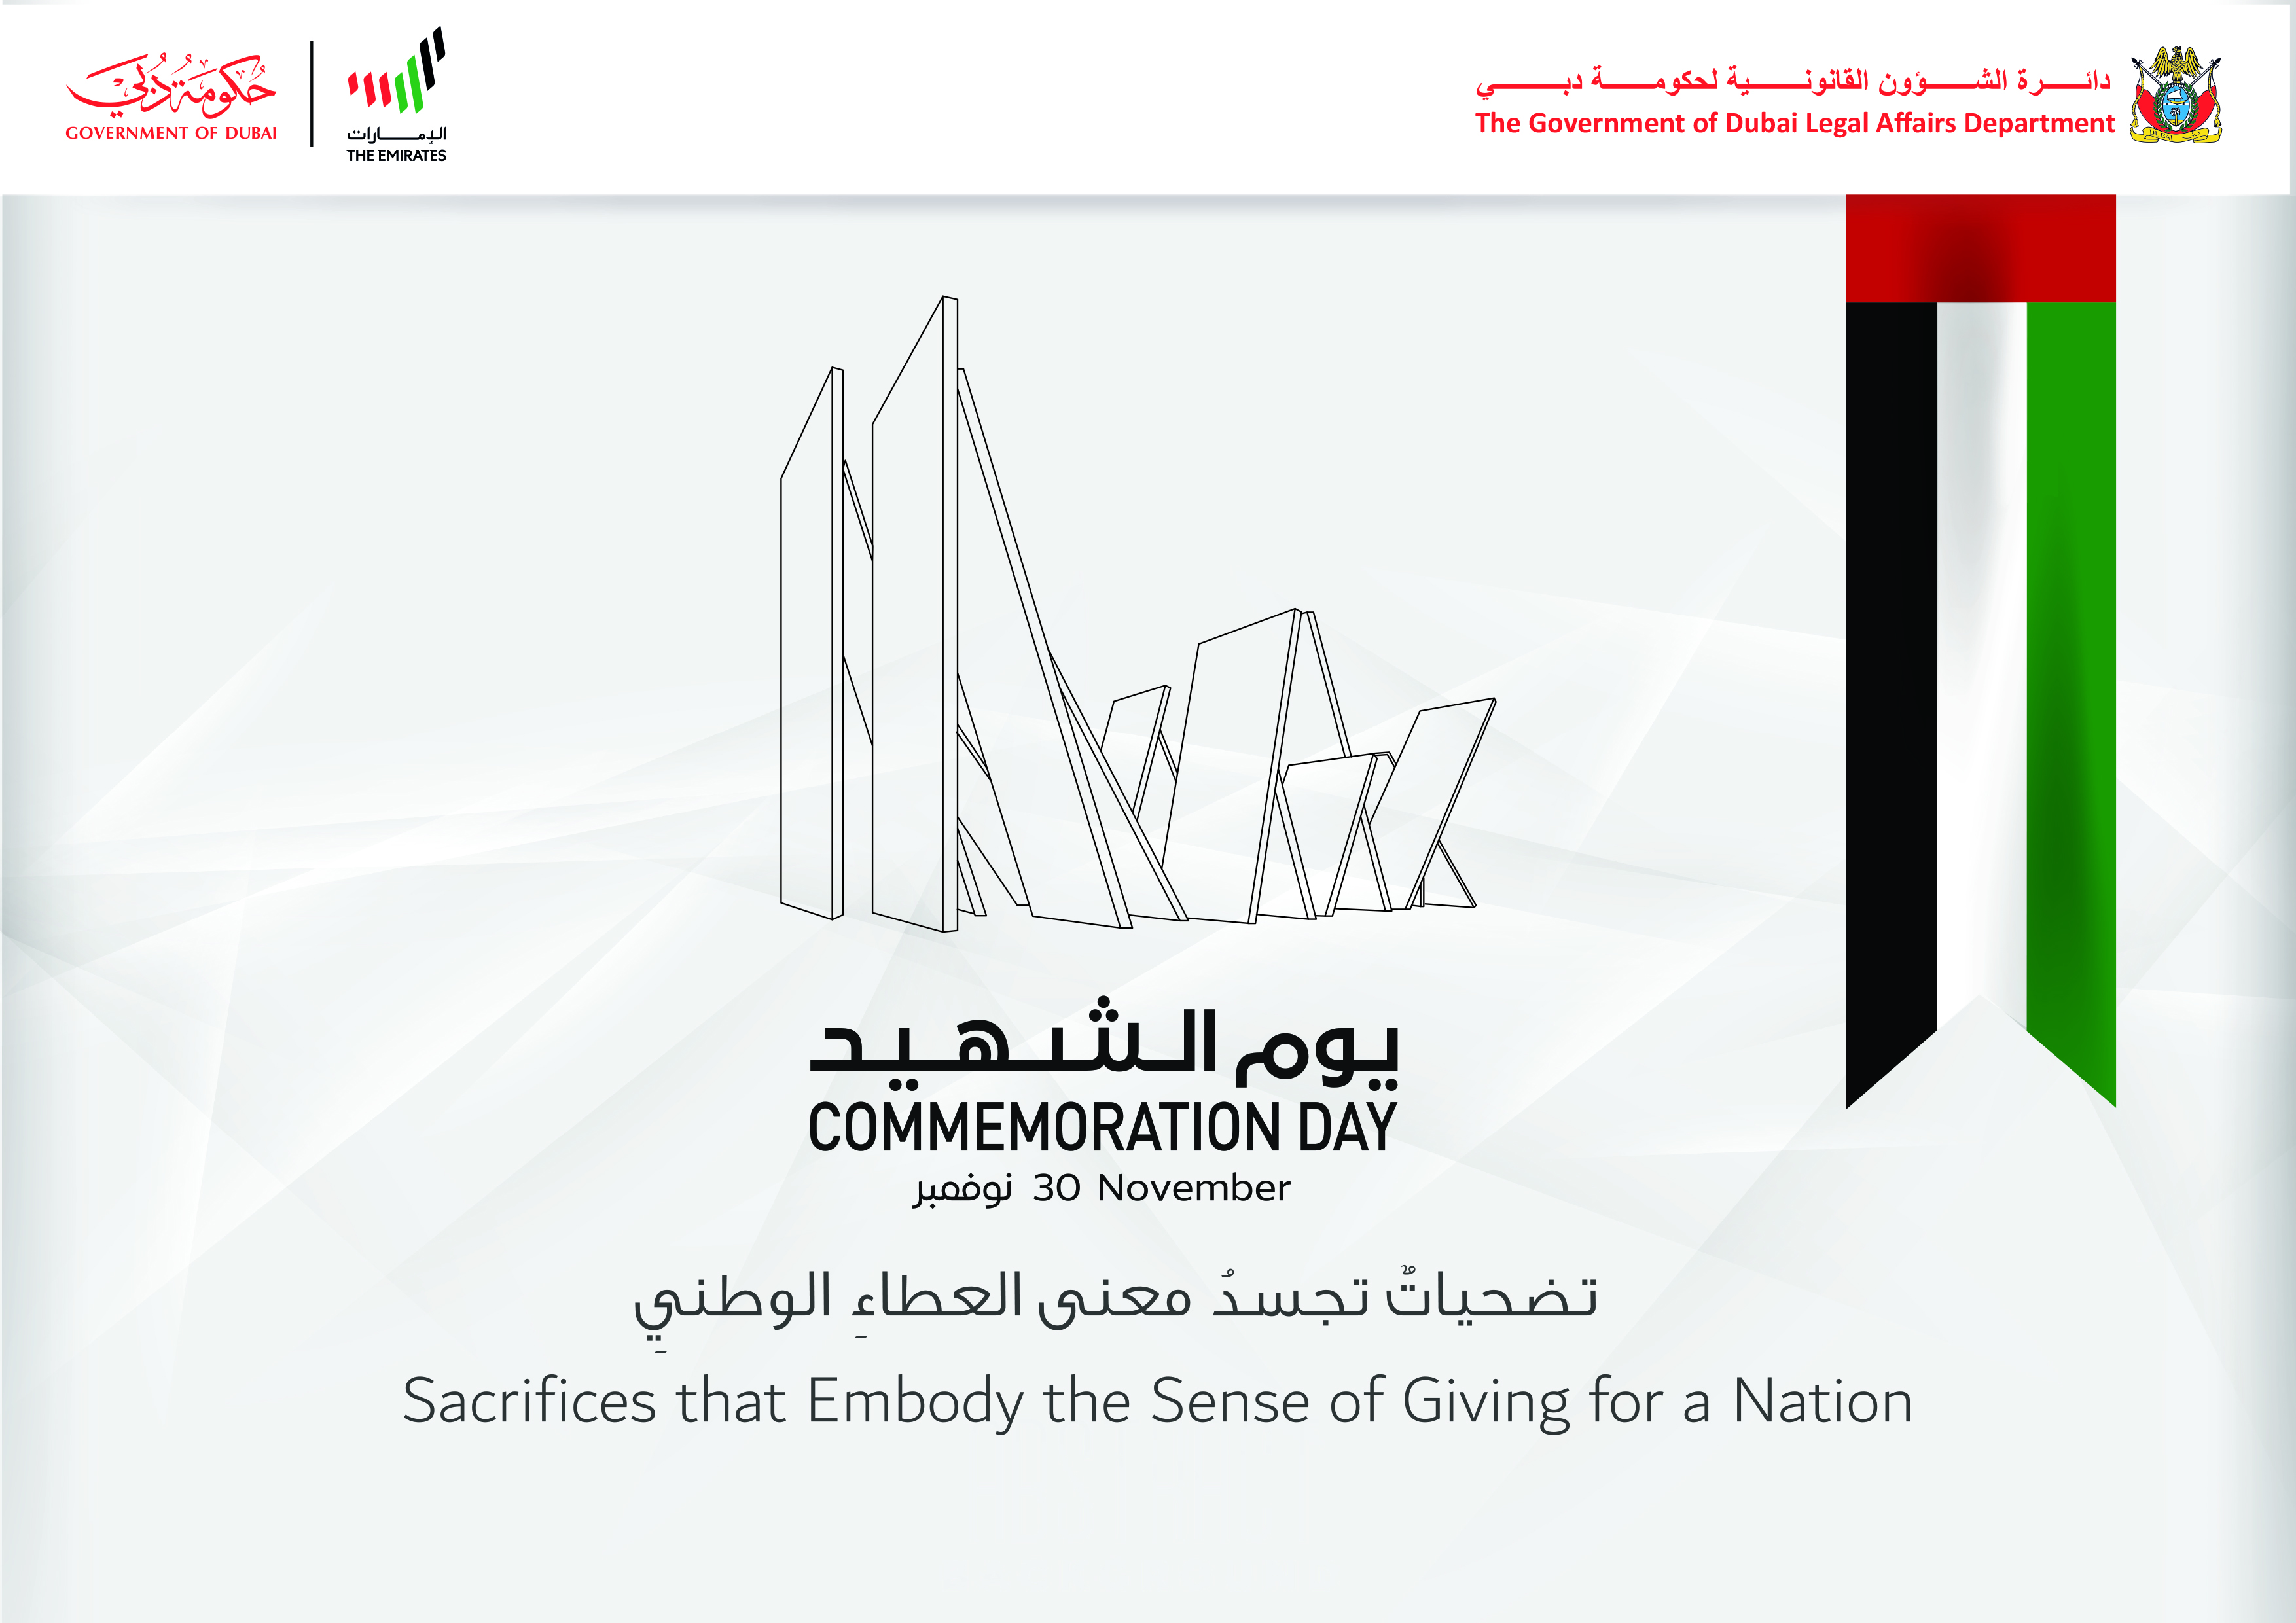 Director General of the Government of Dubai Legal Affairs Department on the Occasion of Commemoration Day: